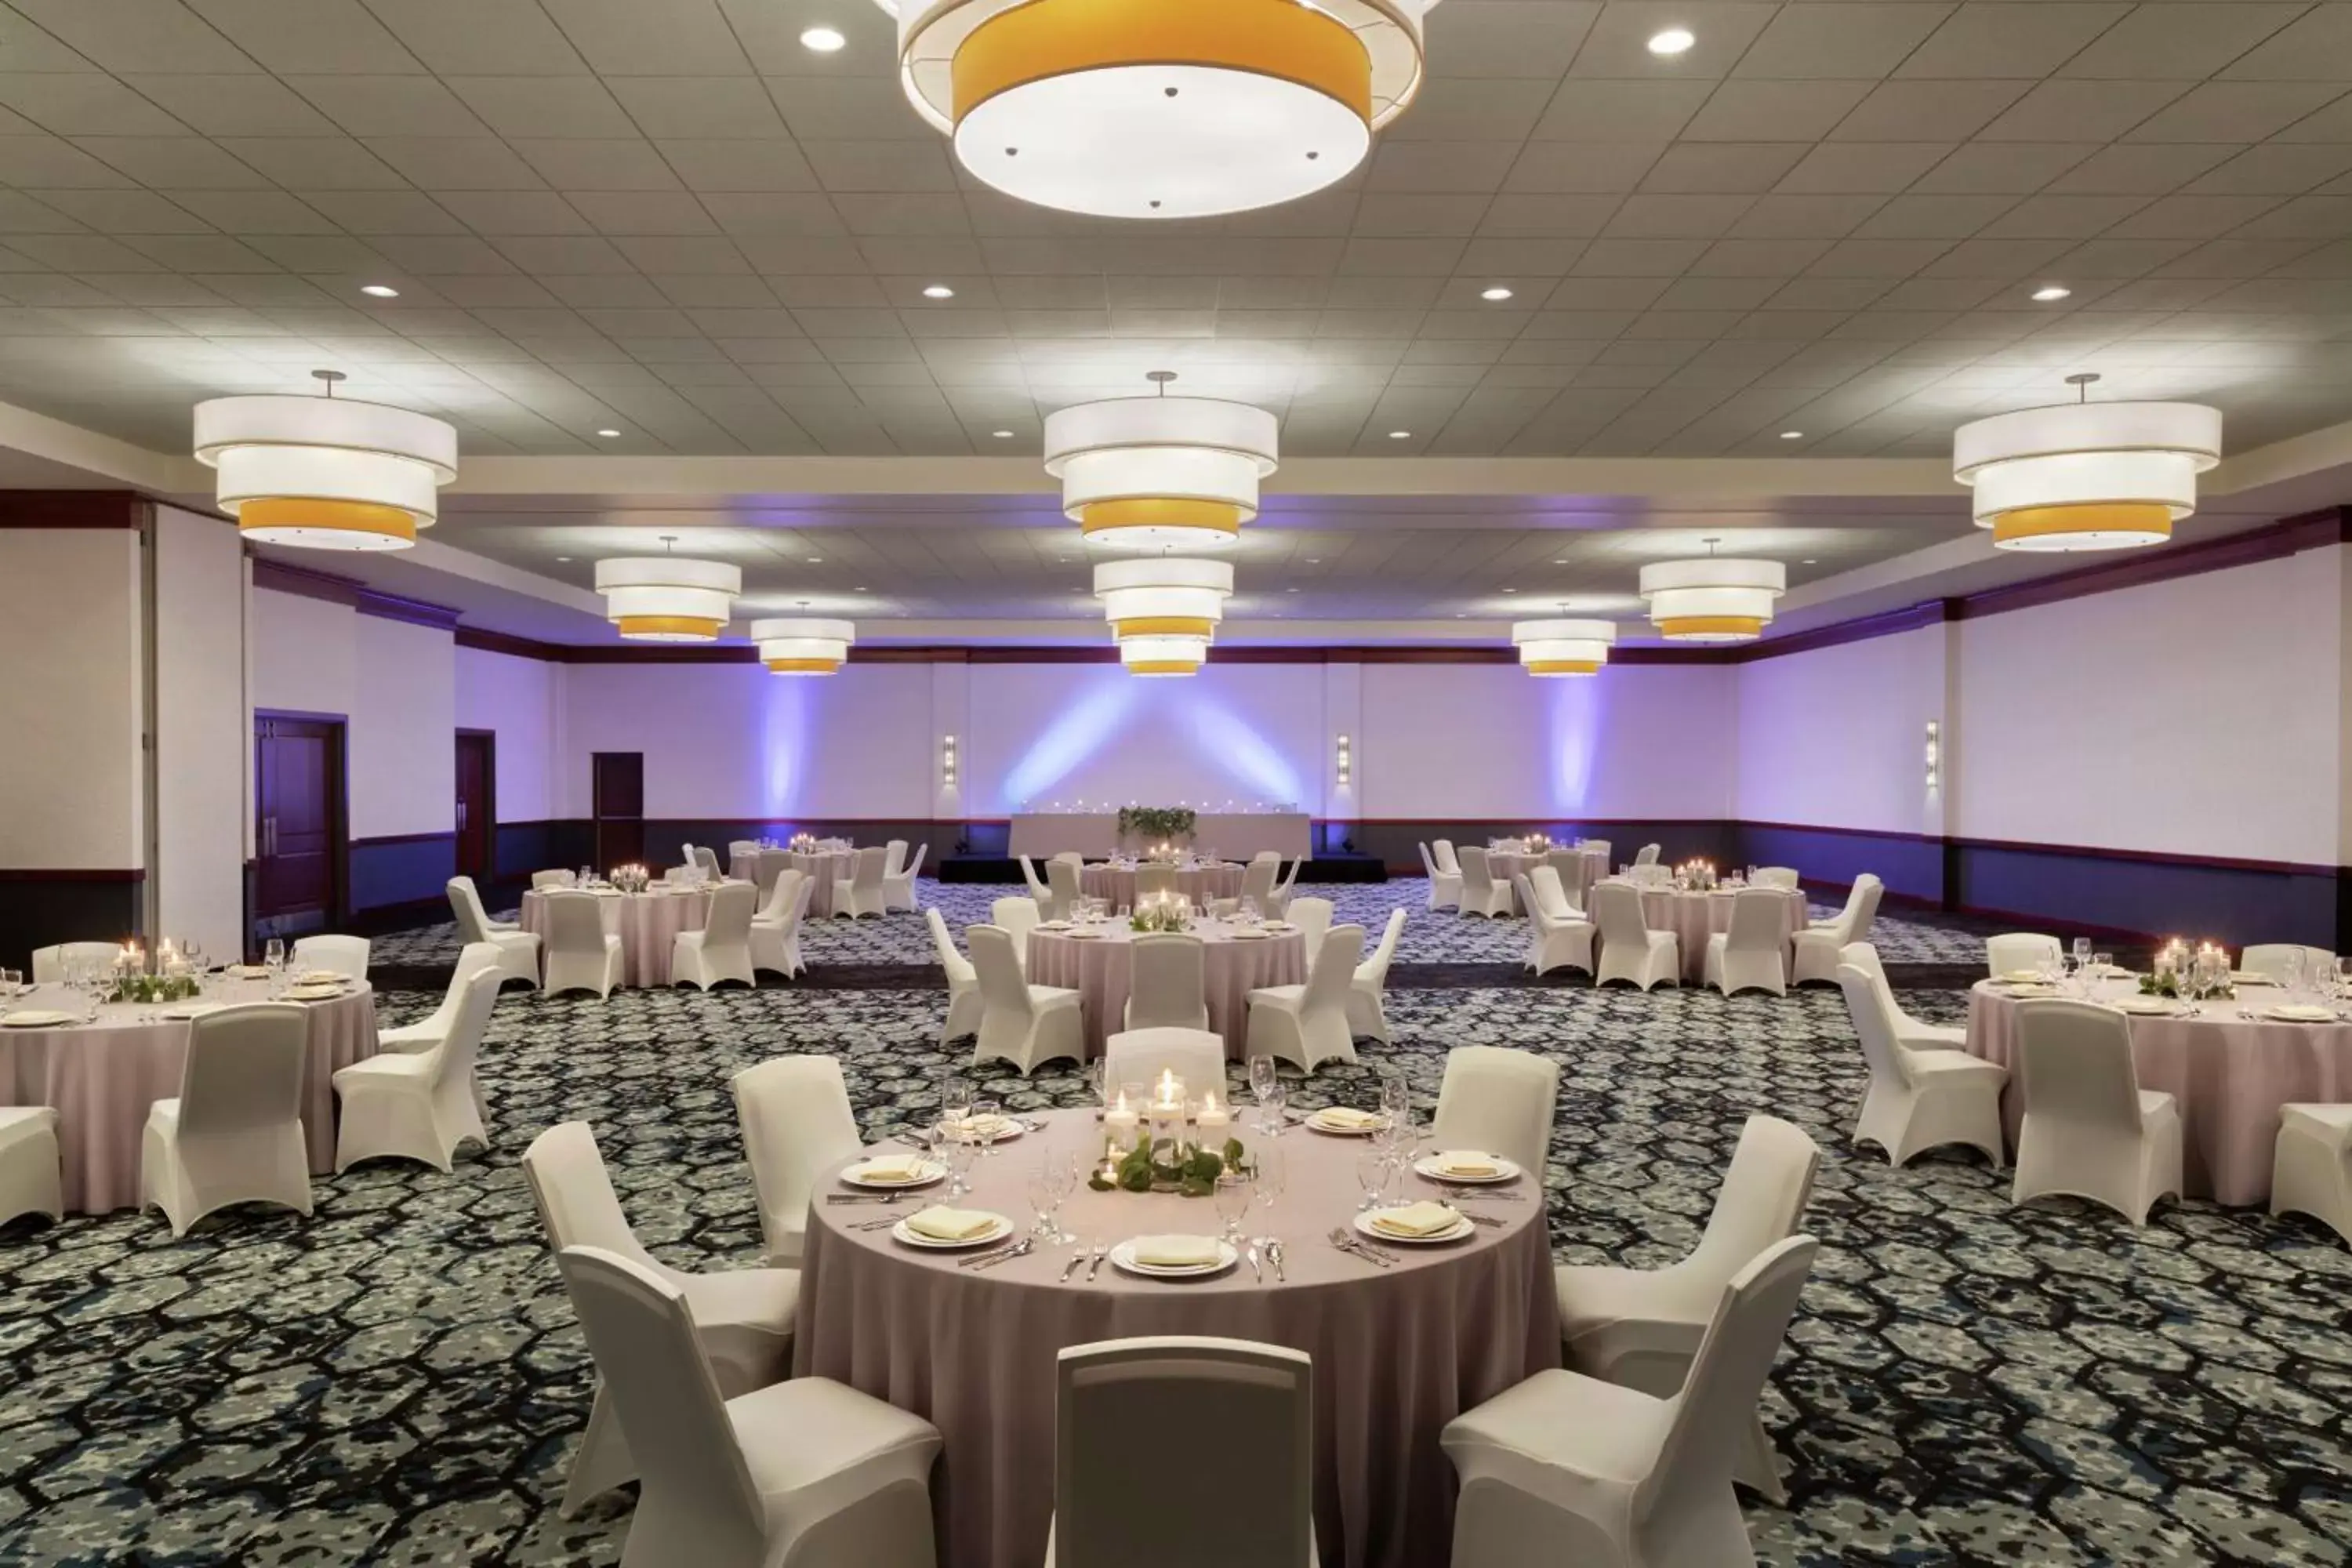 Meeting/conference room, Banquet Facilities in Hilton Garden Inn Troy